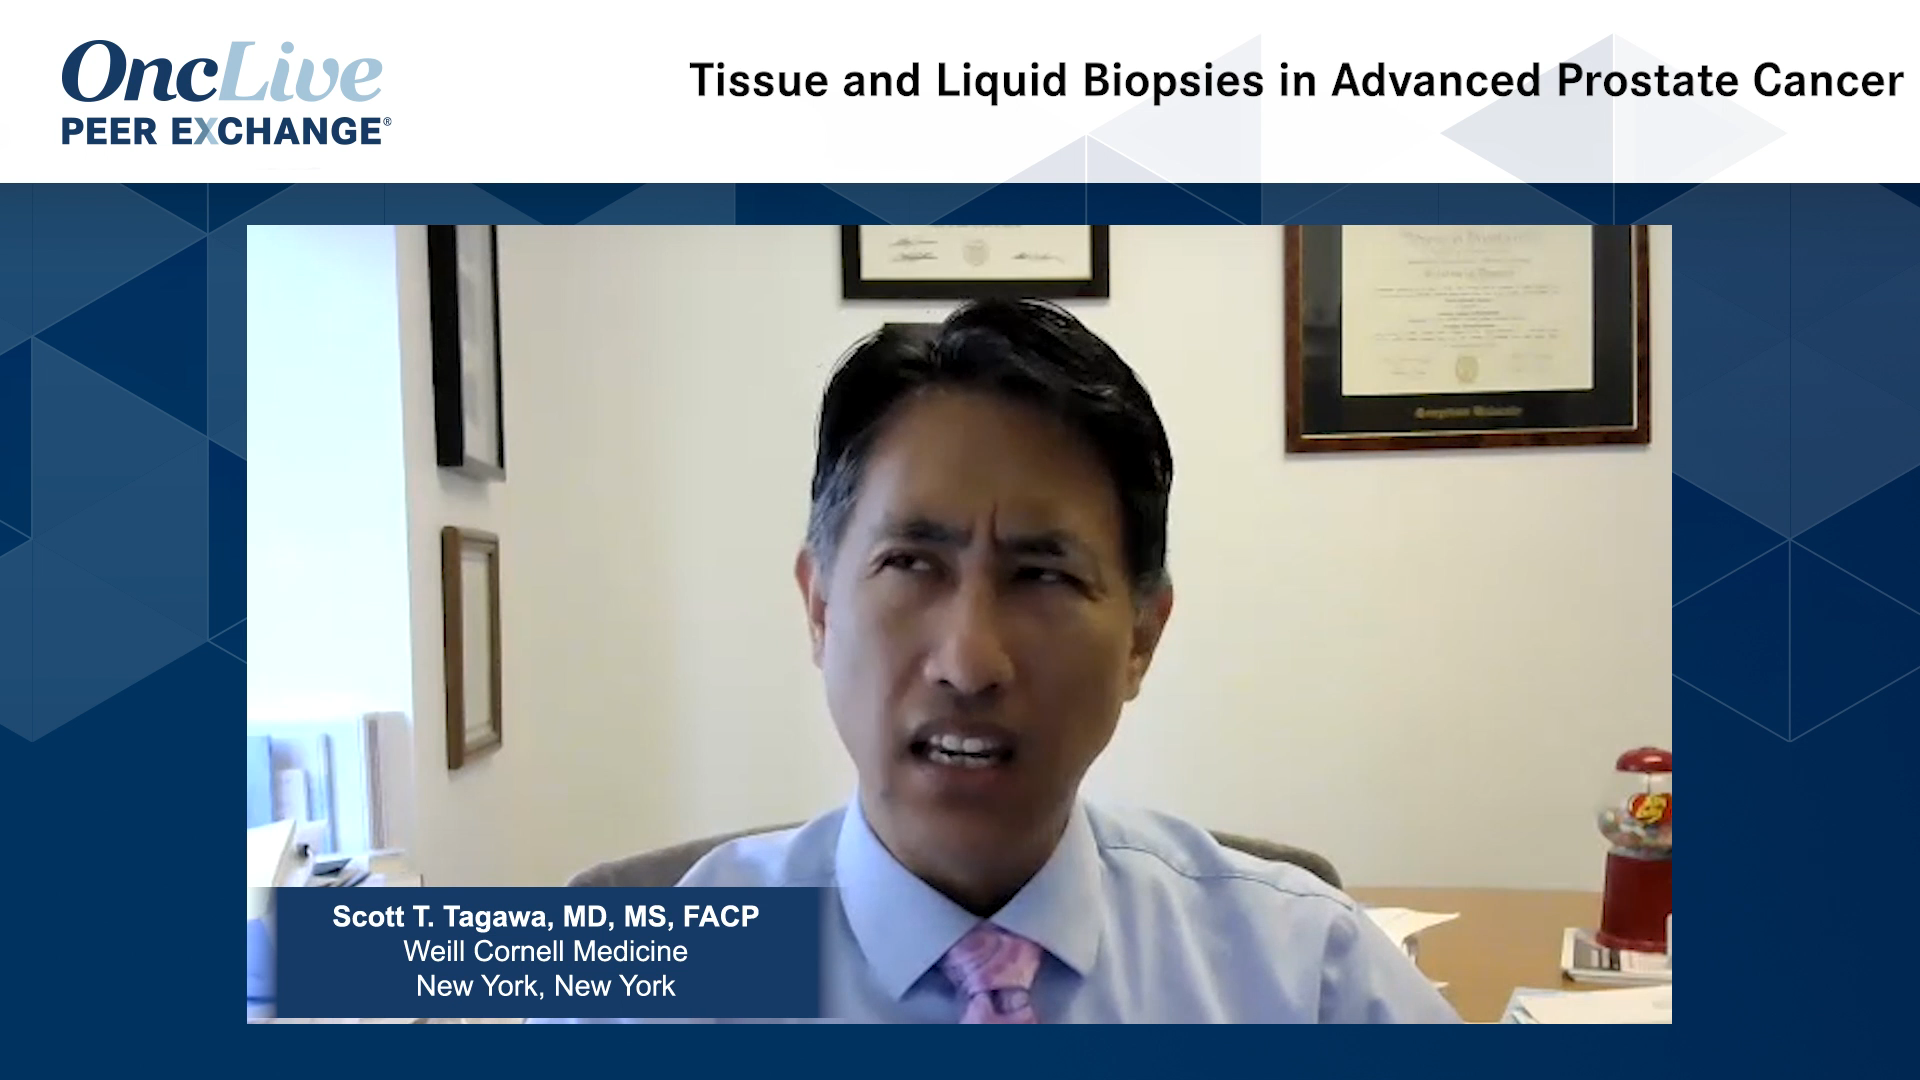 Tissue and Liquid Biopsies in Advanced Prostate Cancer